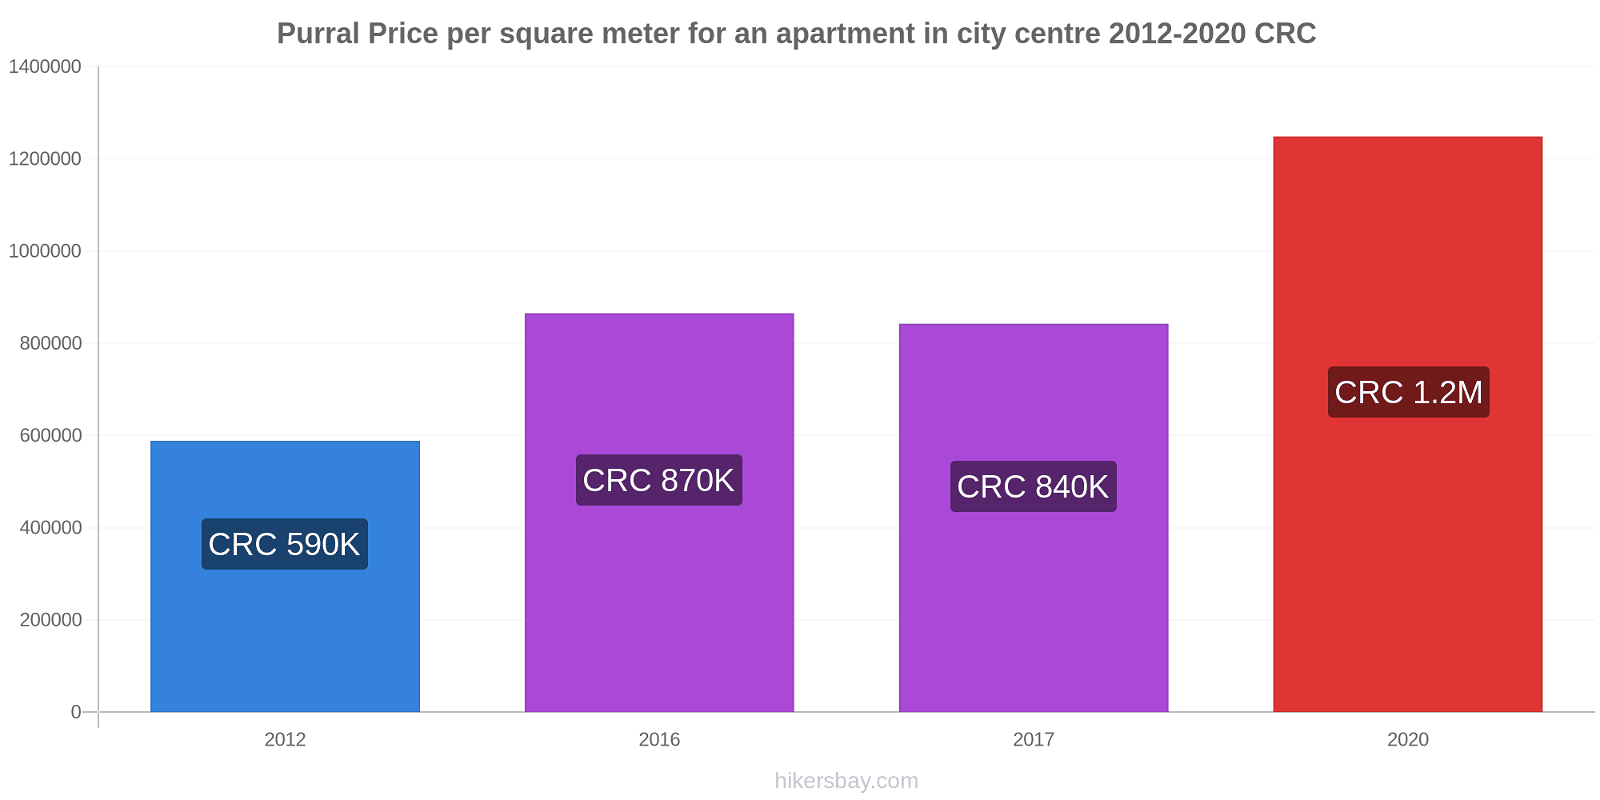 Purral price changes Price per square meter for an apartment in city centre hikersbay.com